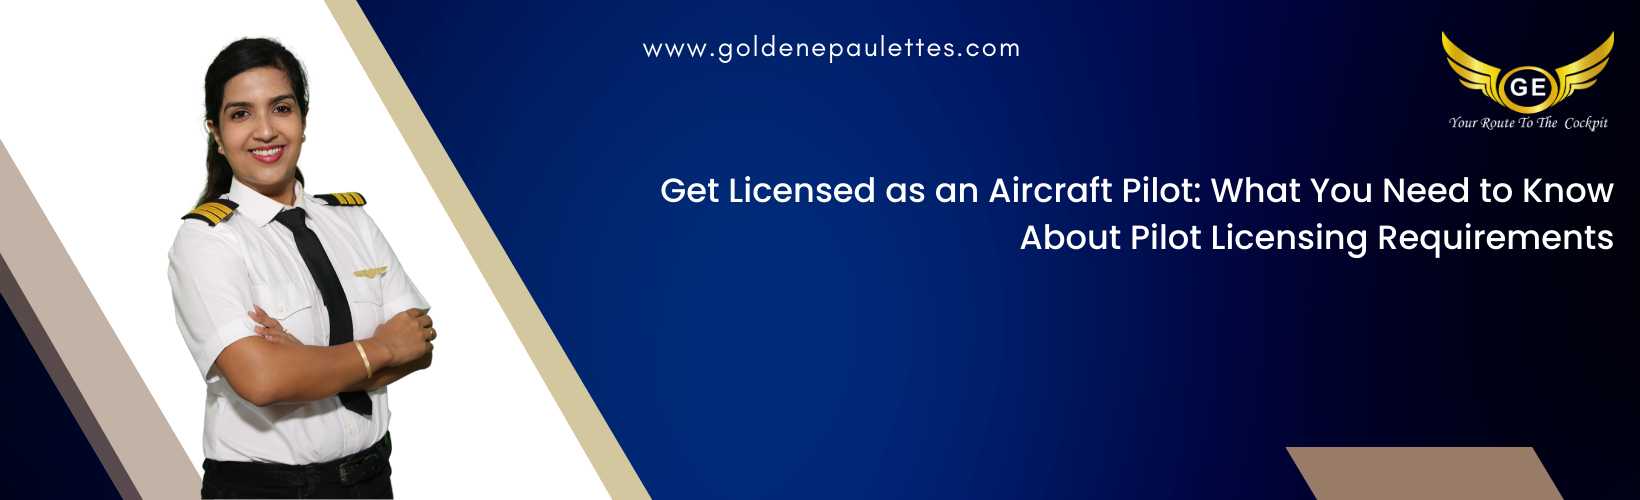 What You Need to Know About Pilot Licensing